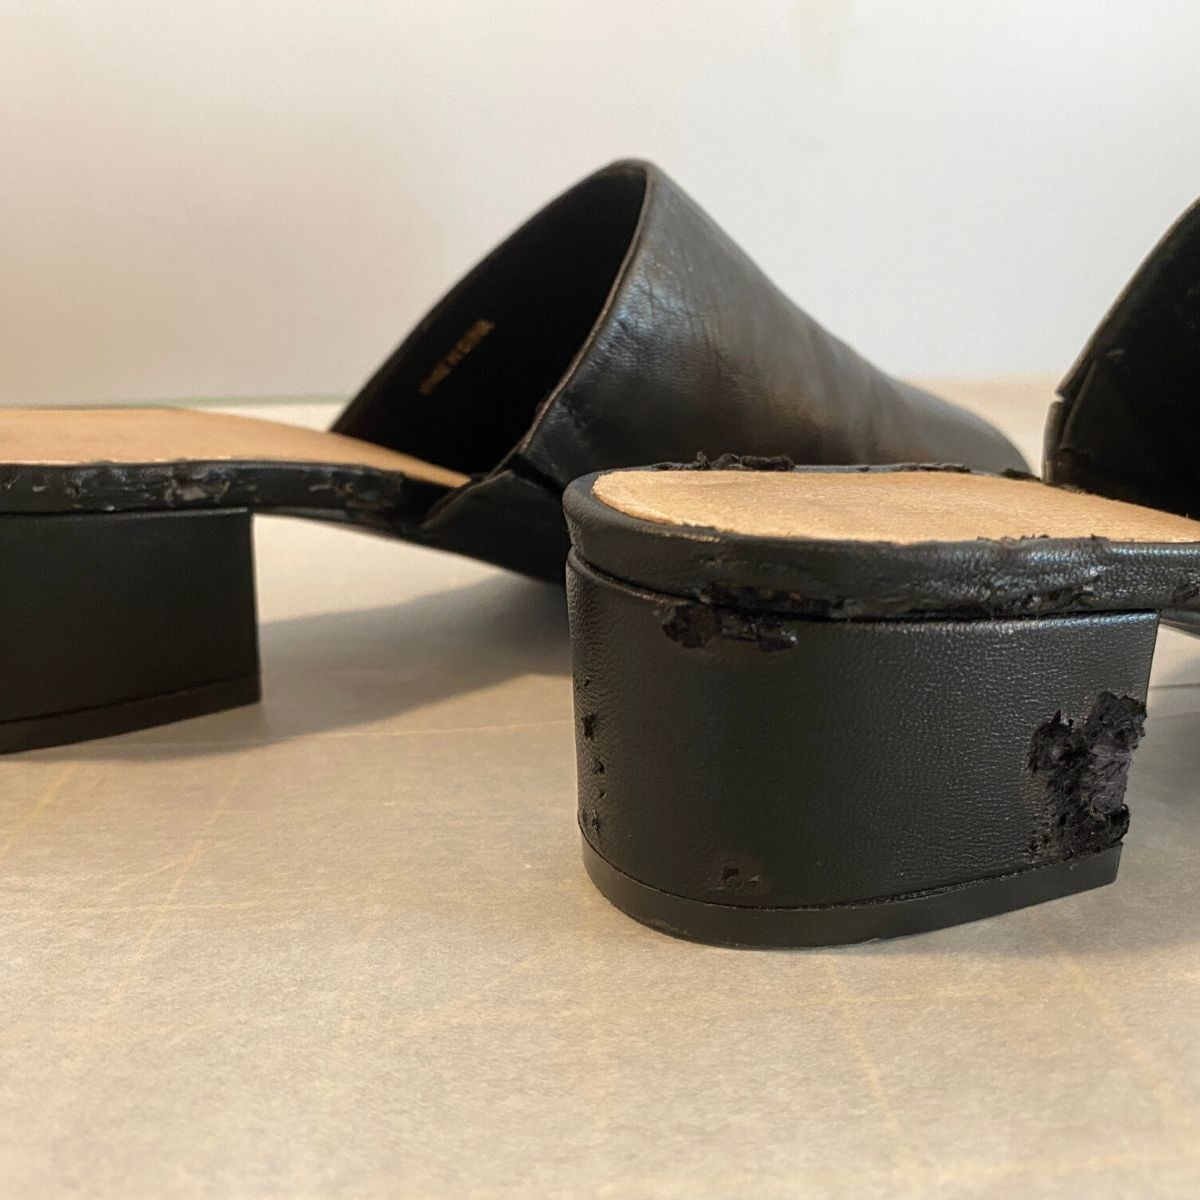 Black shoes with damaged heels